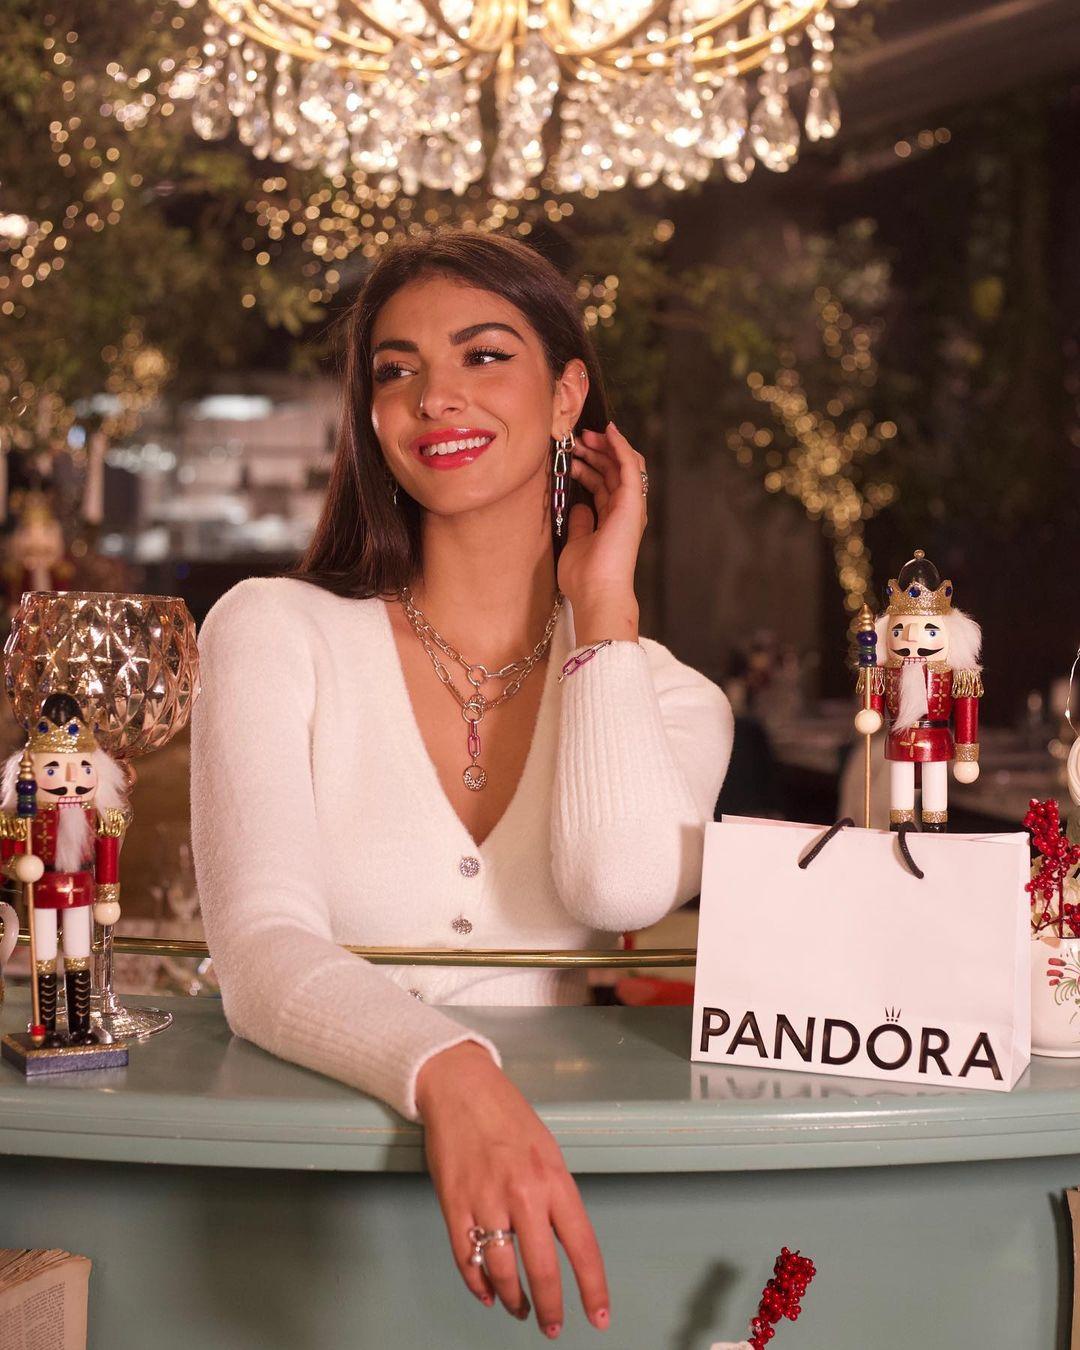 It’s the most beautiful time of the year! With #PandoraME @theofficialpandora
#ForEveryME 🎀
#shotforpandora
adv